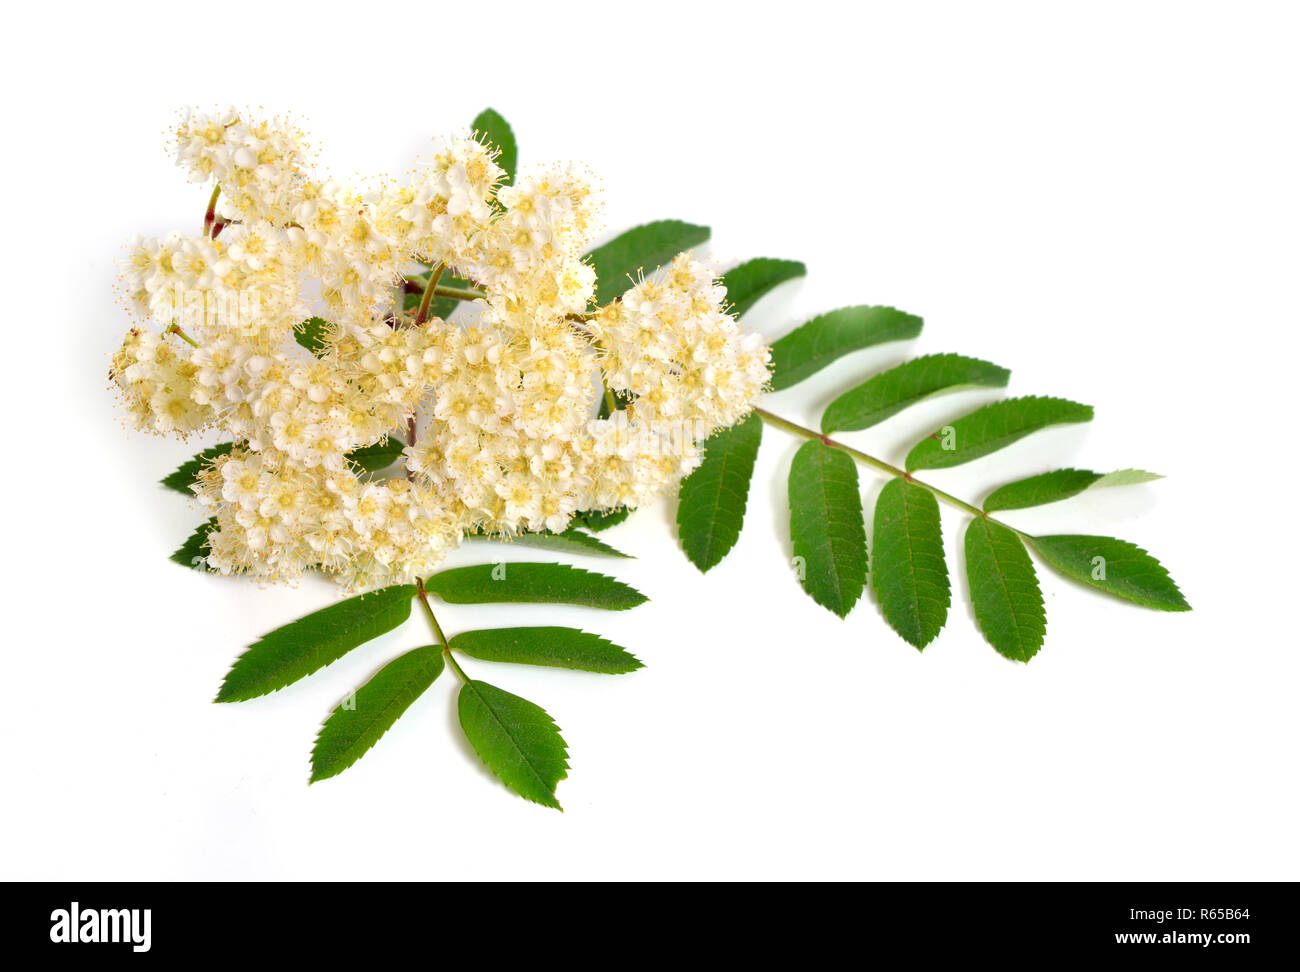 Sorbus aucuparia flowers isolated on white background Stock Photo - Alamy